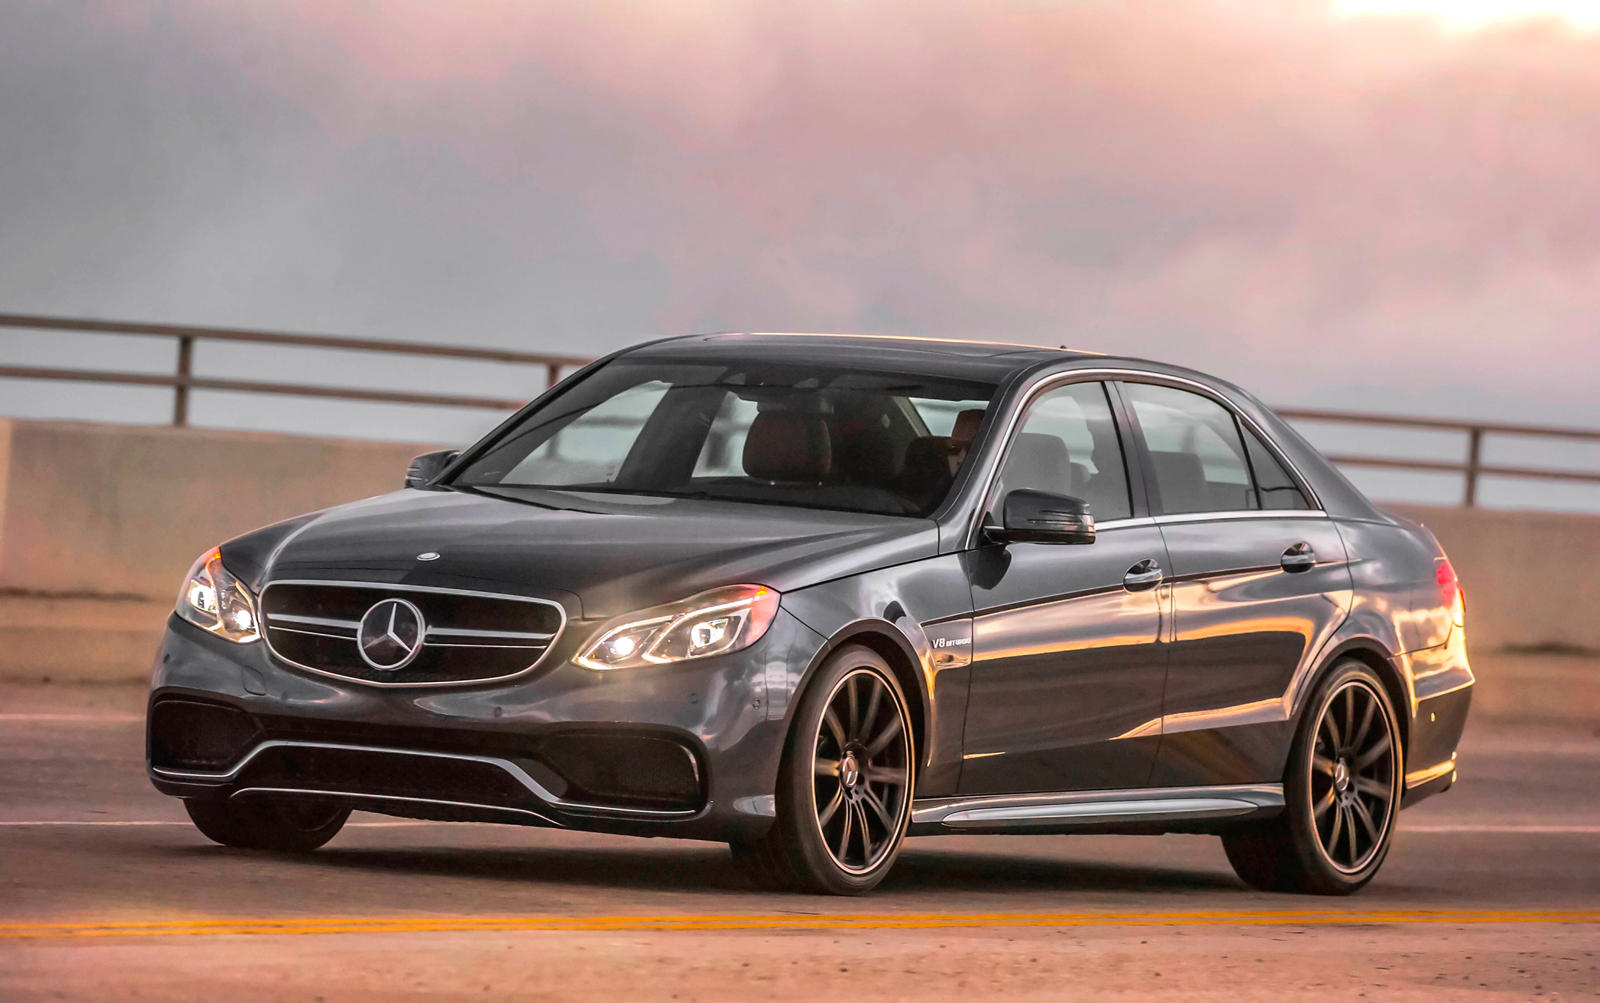 2016 Mercedes-AMG E63 Sedan: Review, Trims, Specs, Price, New Interior  Features, Exterior Design, and Specifications